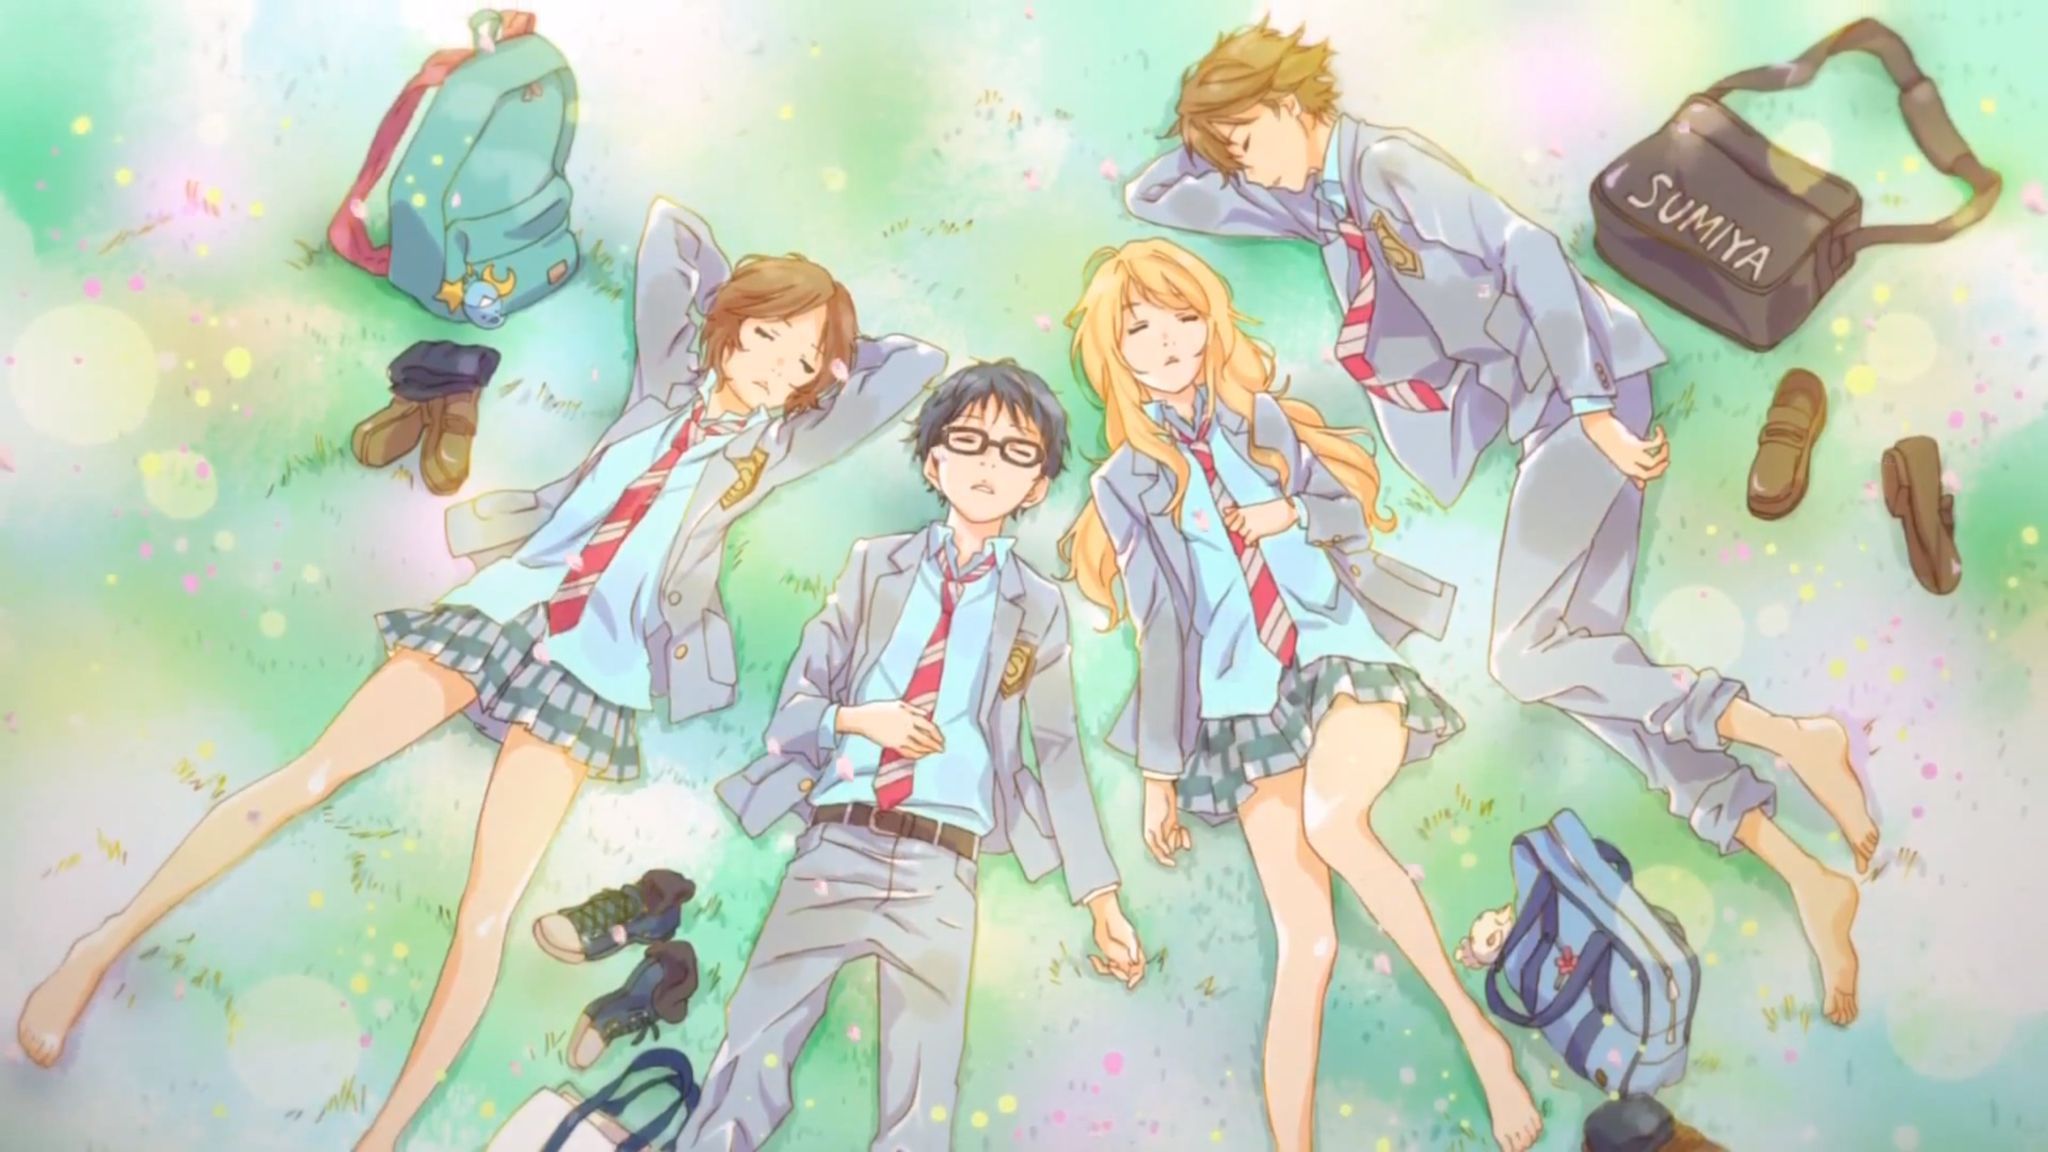 Your Lie in April Watercolor Wallpaper Free Your Lie